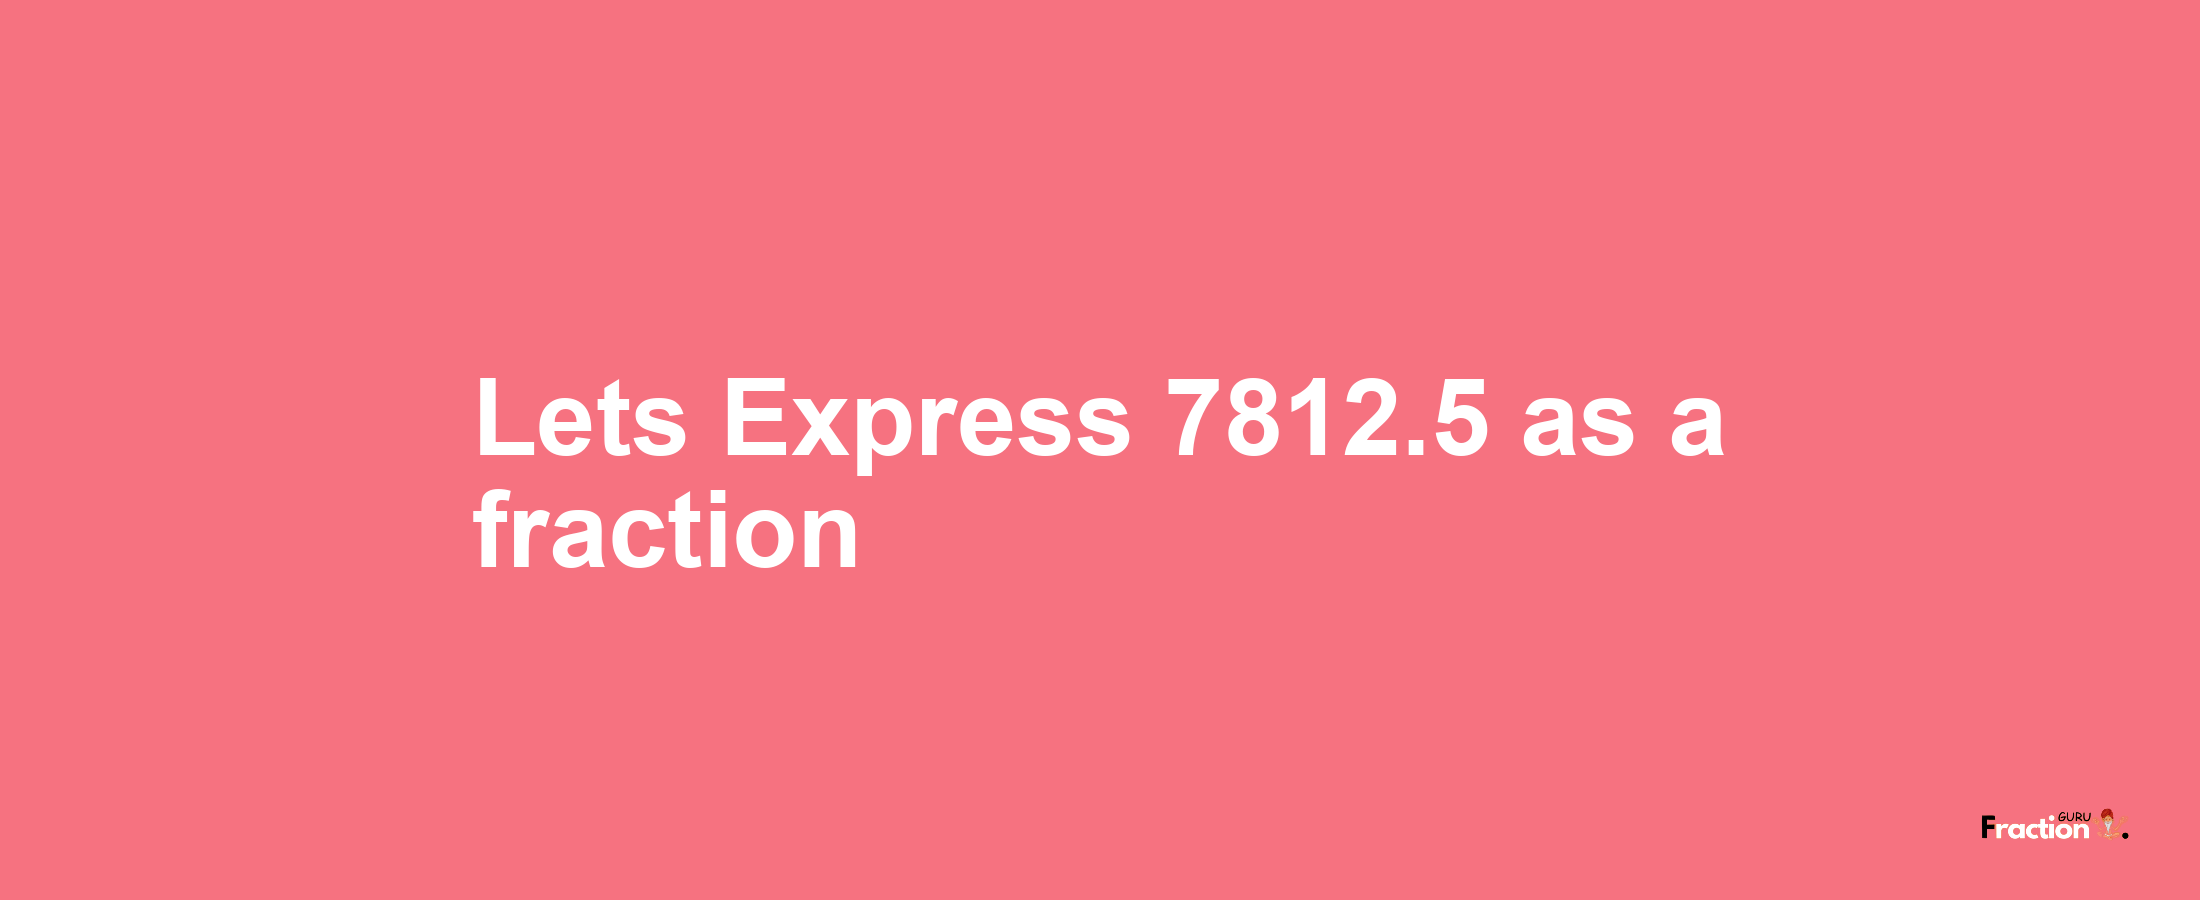 Lets Express 7812.5 as afraction